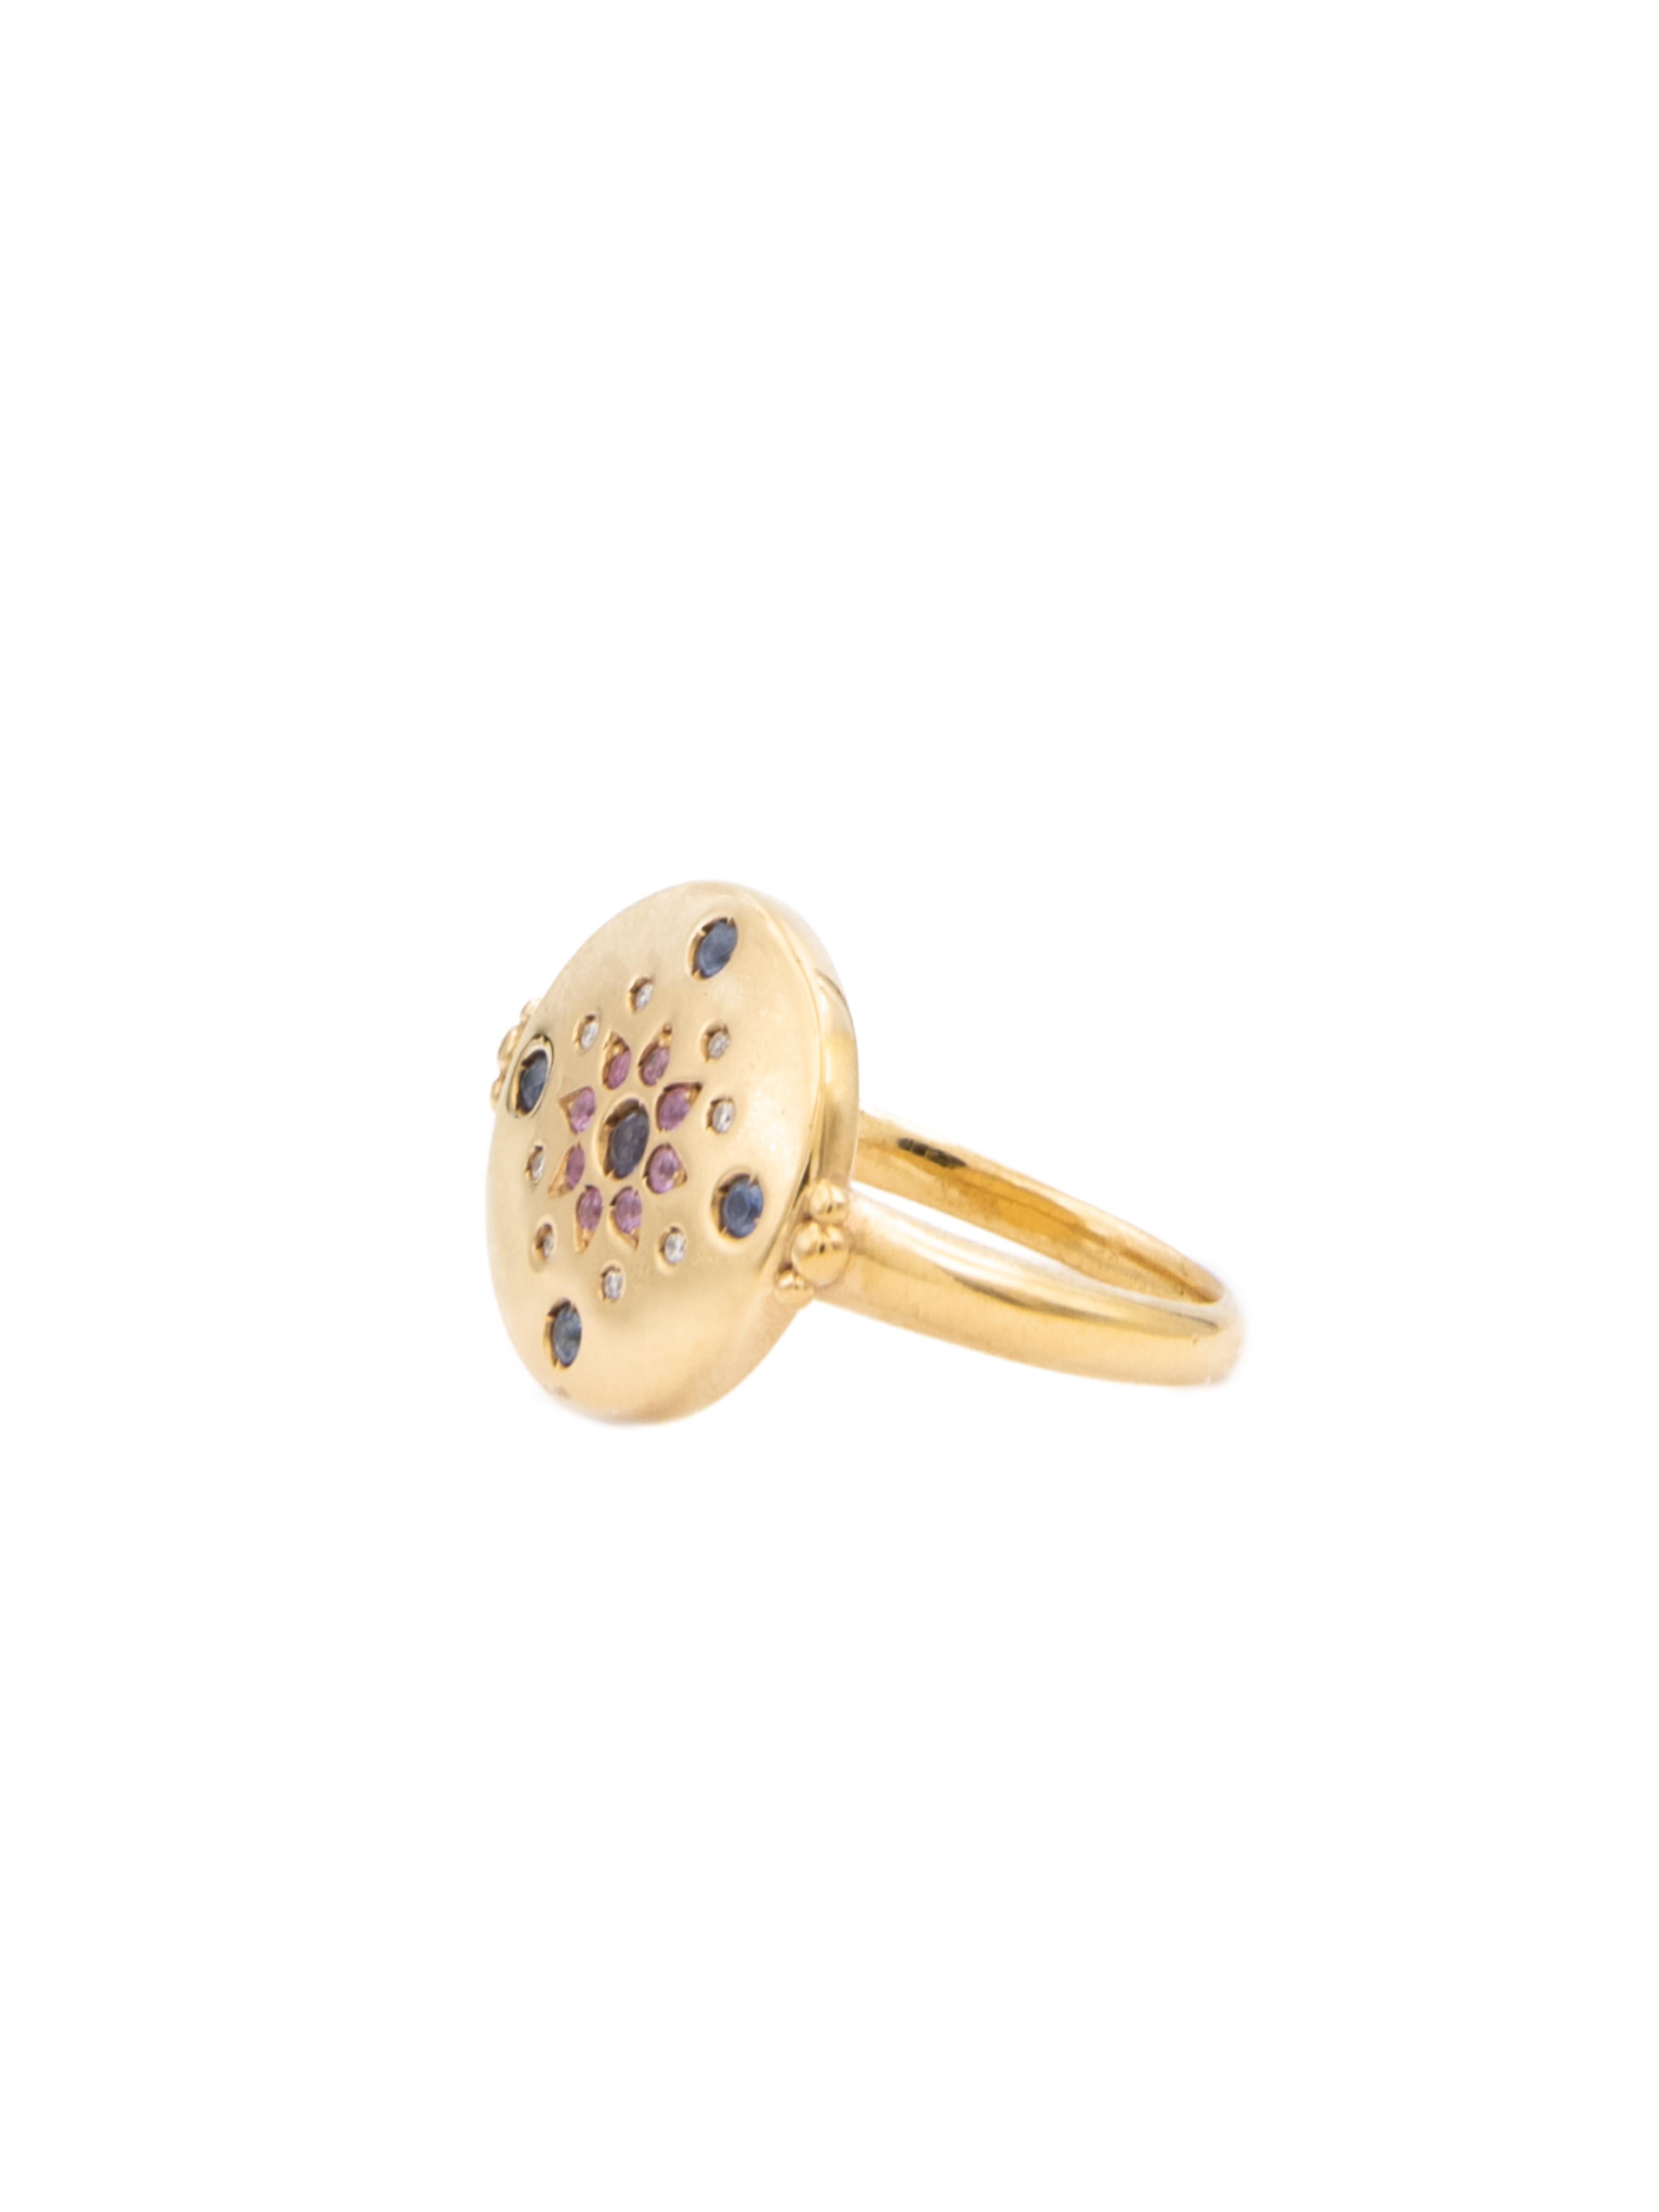 18 karat yellow gold signet ring. The ring is set with 21 gemstones including a central iolite, 0,16-carat of blue and pink sapphires and 0,11-carat of diamonds.   

The ring is available in three sizes (Italian sizes 12, 14 and 16 / US sizes 6, 6